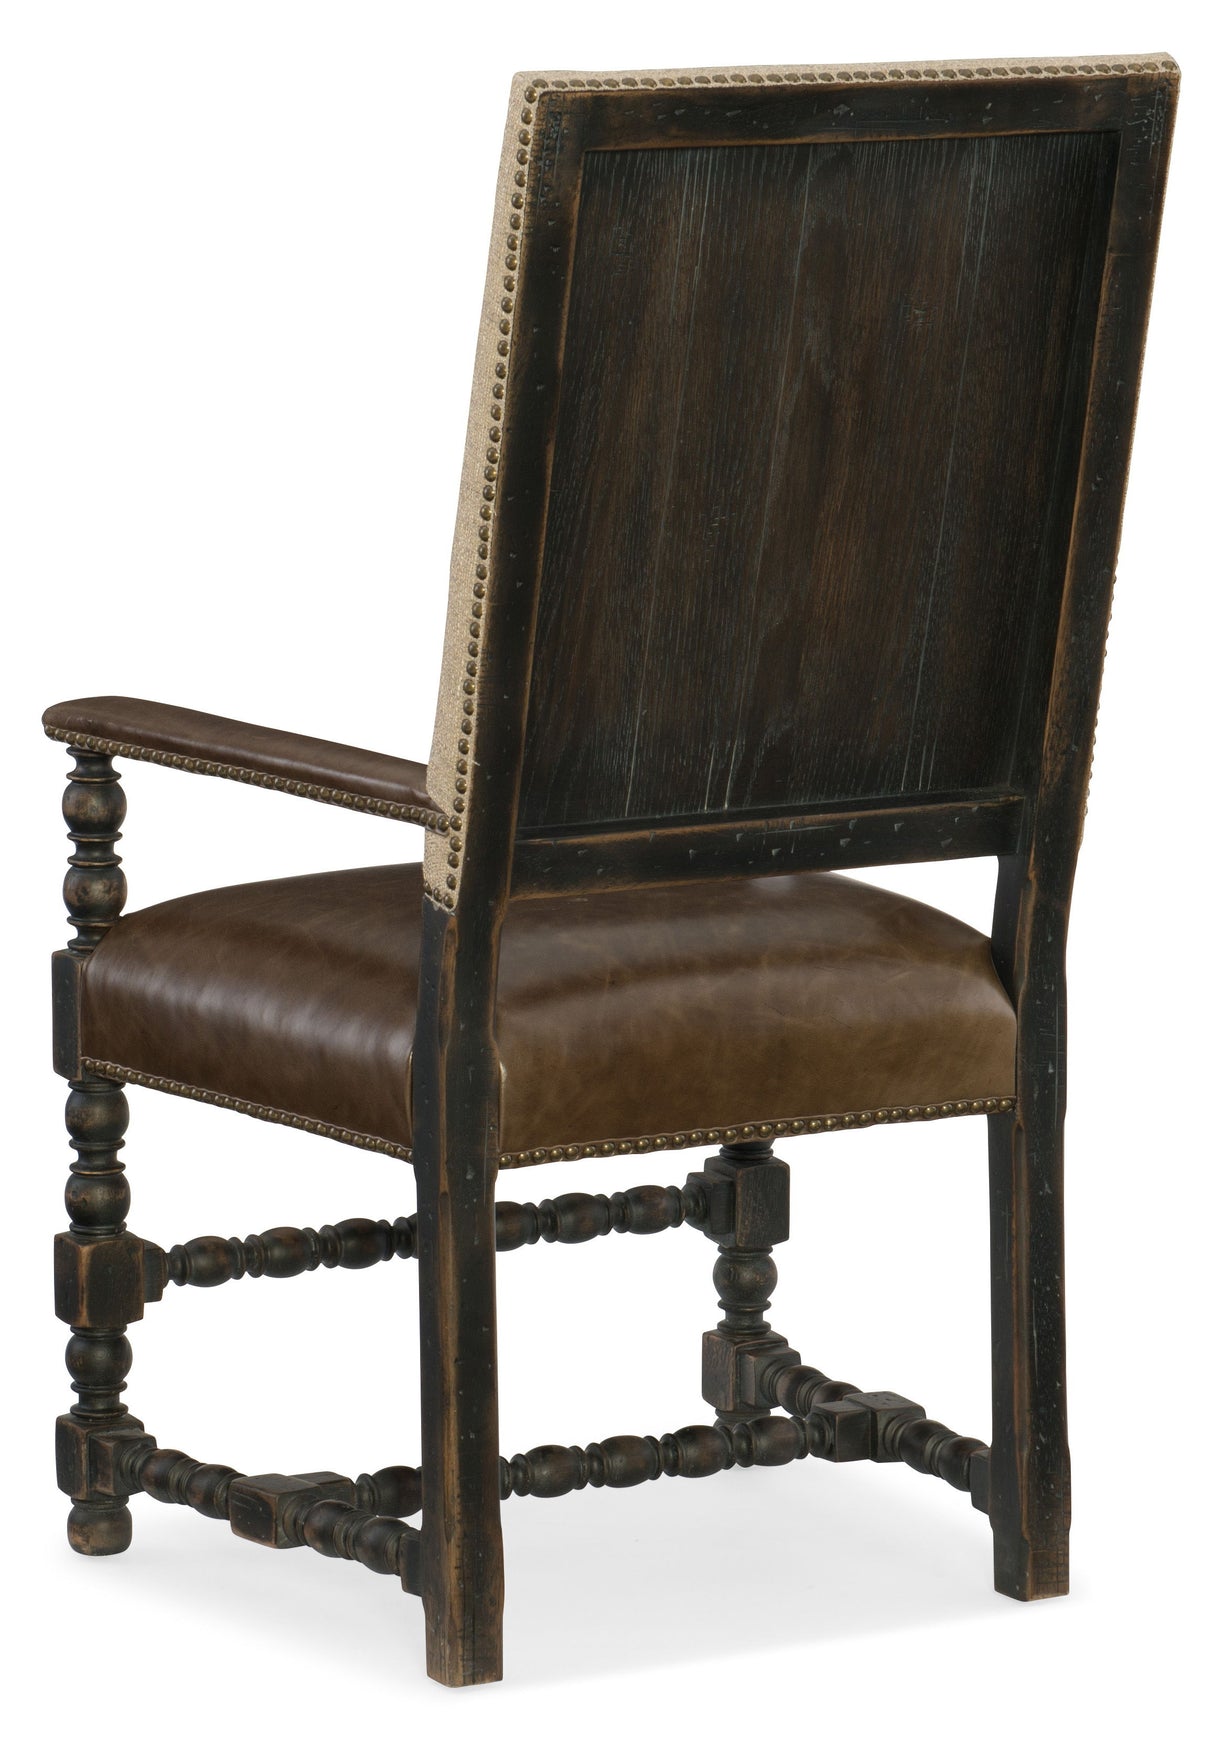 Hill Country - Comfort Upholstered Chair